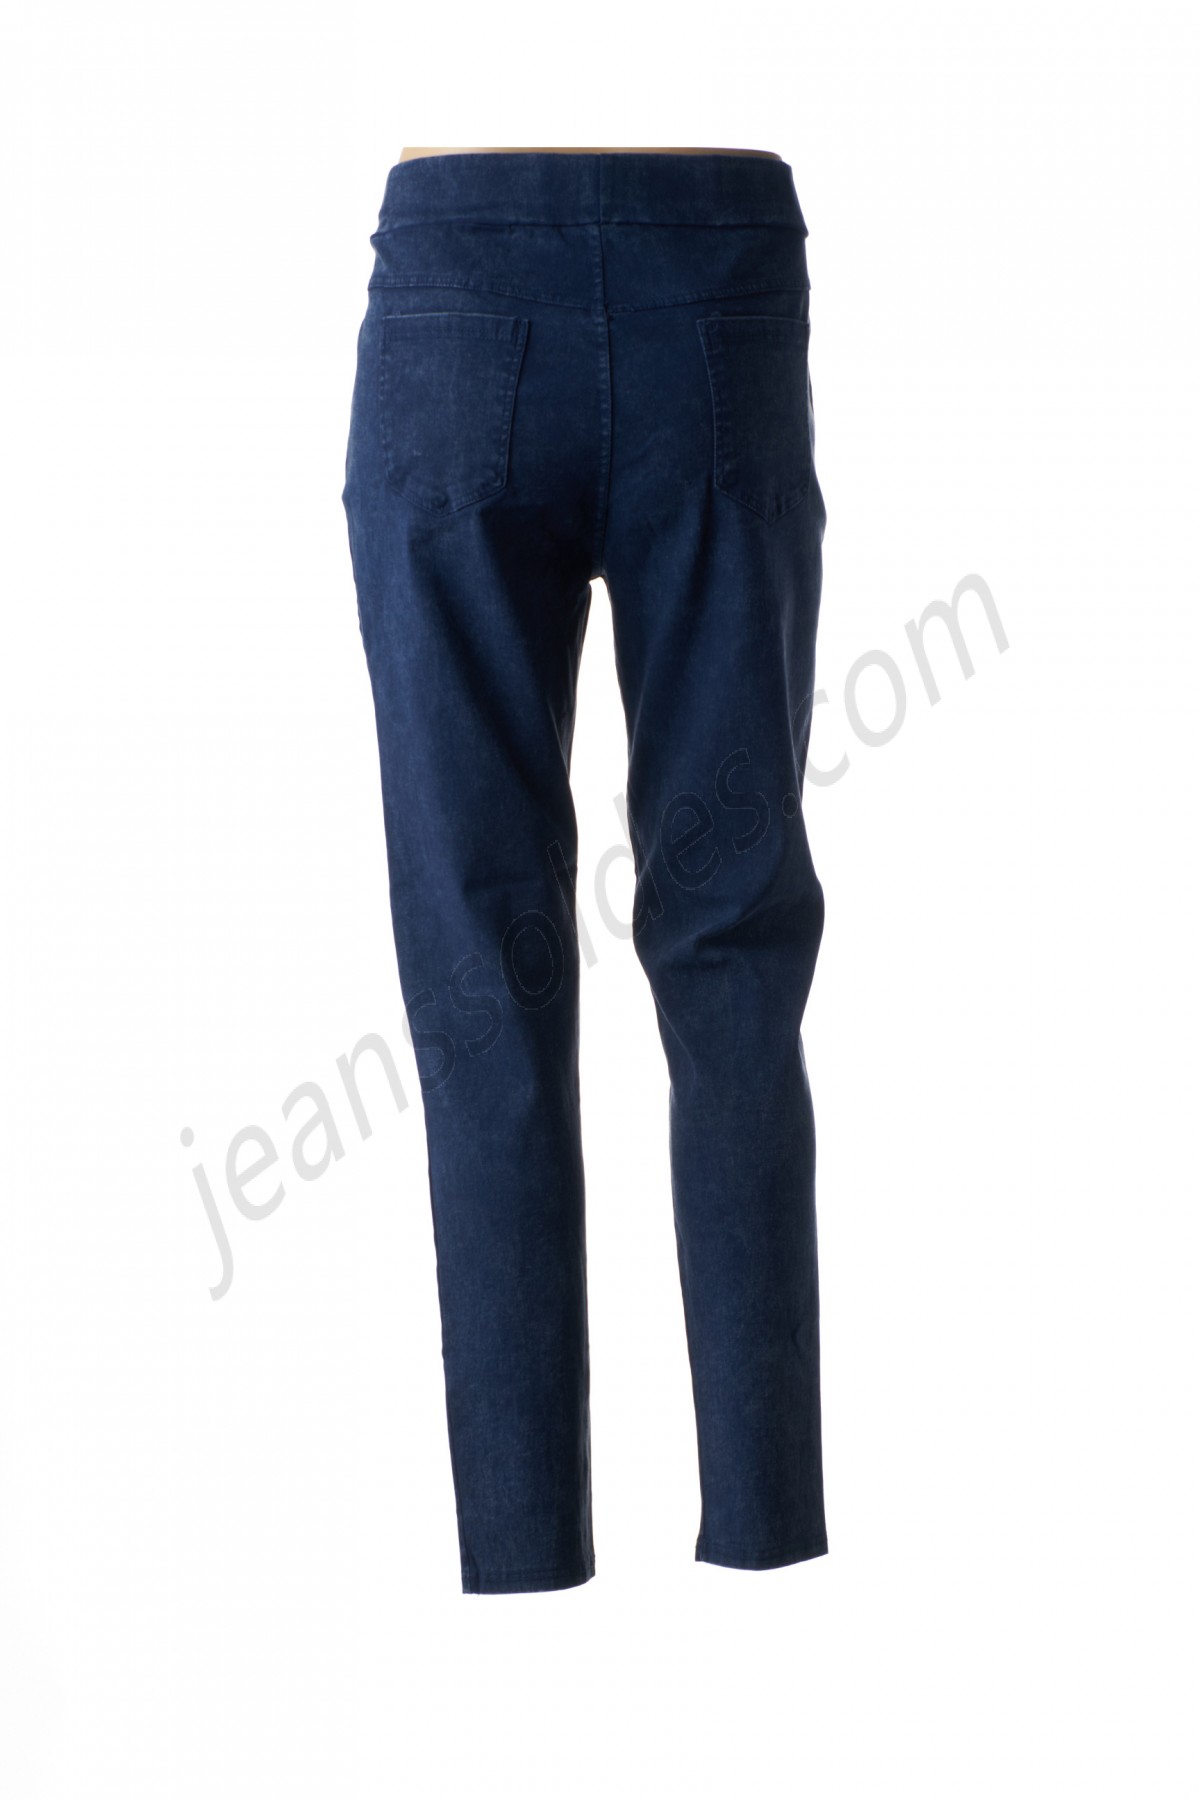 one o one-Jeans coupe slim prix d’amis - -1